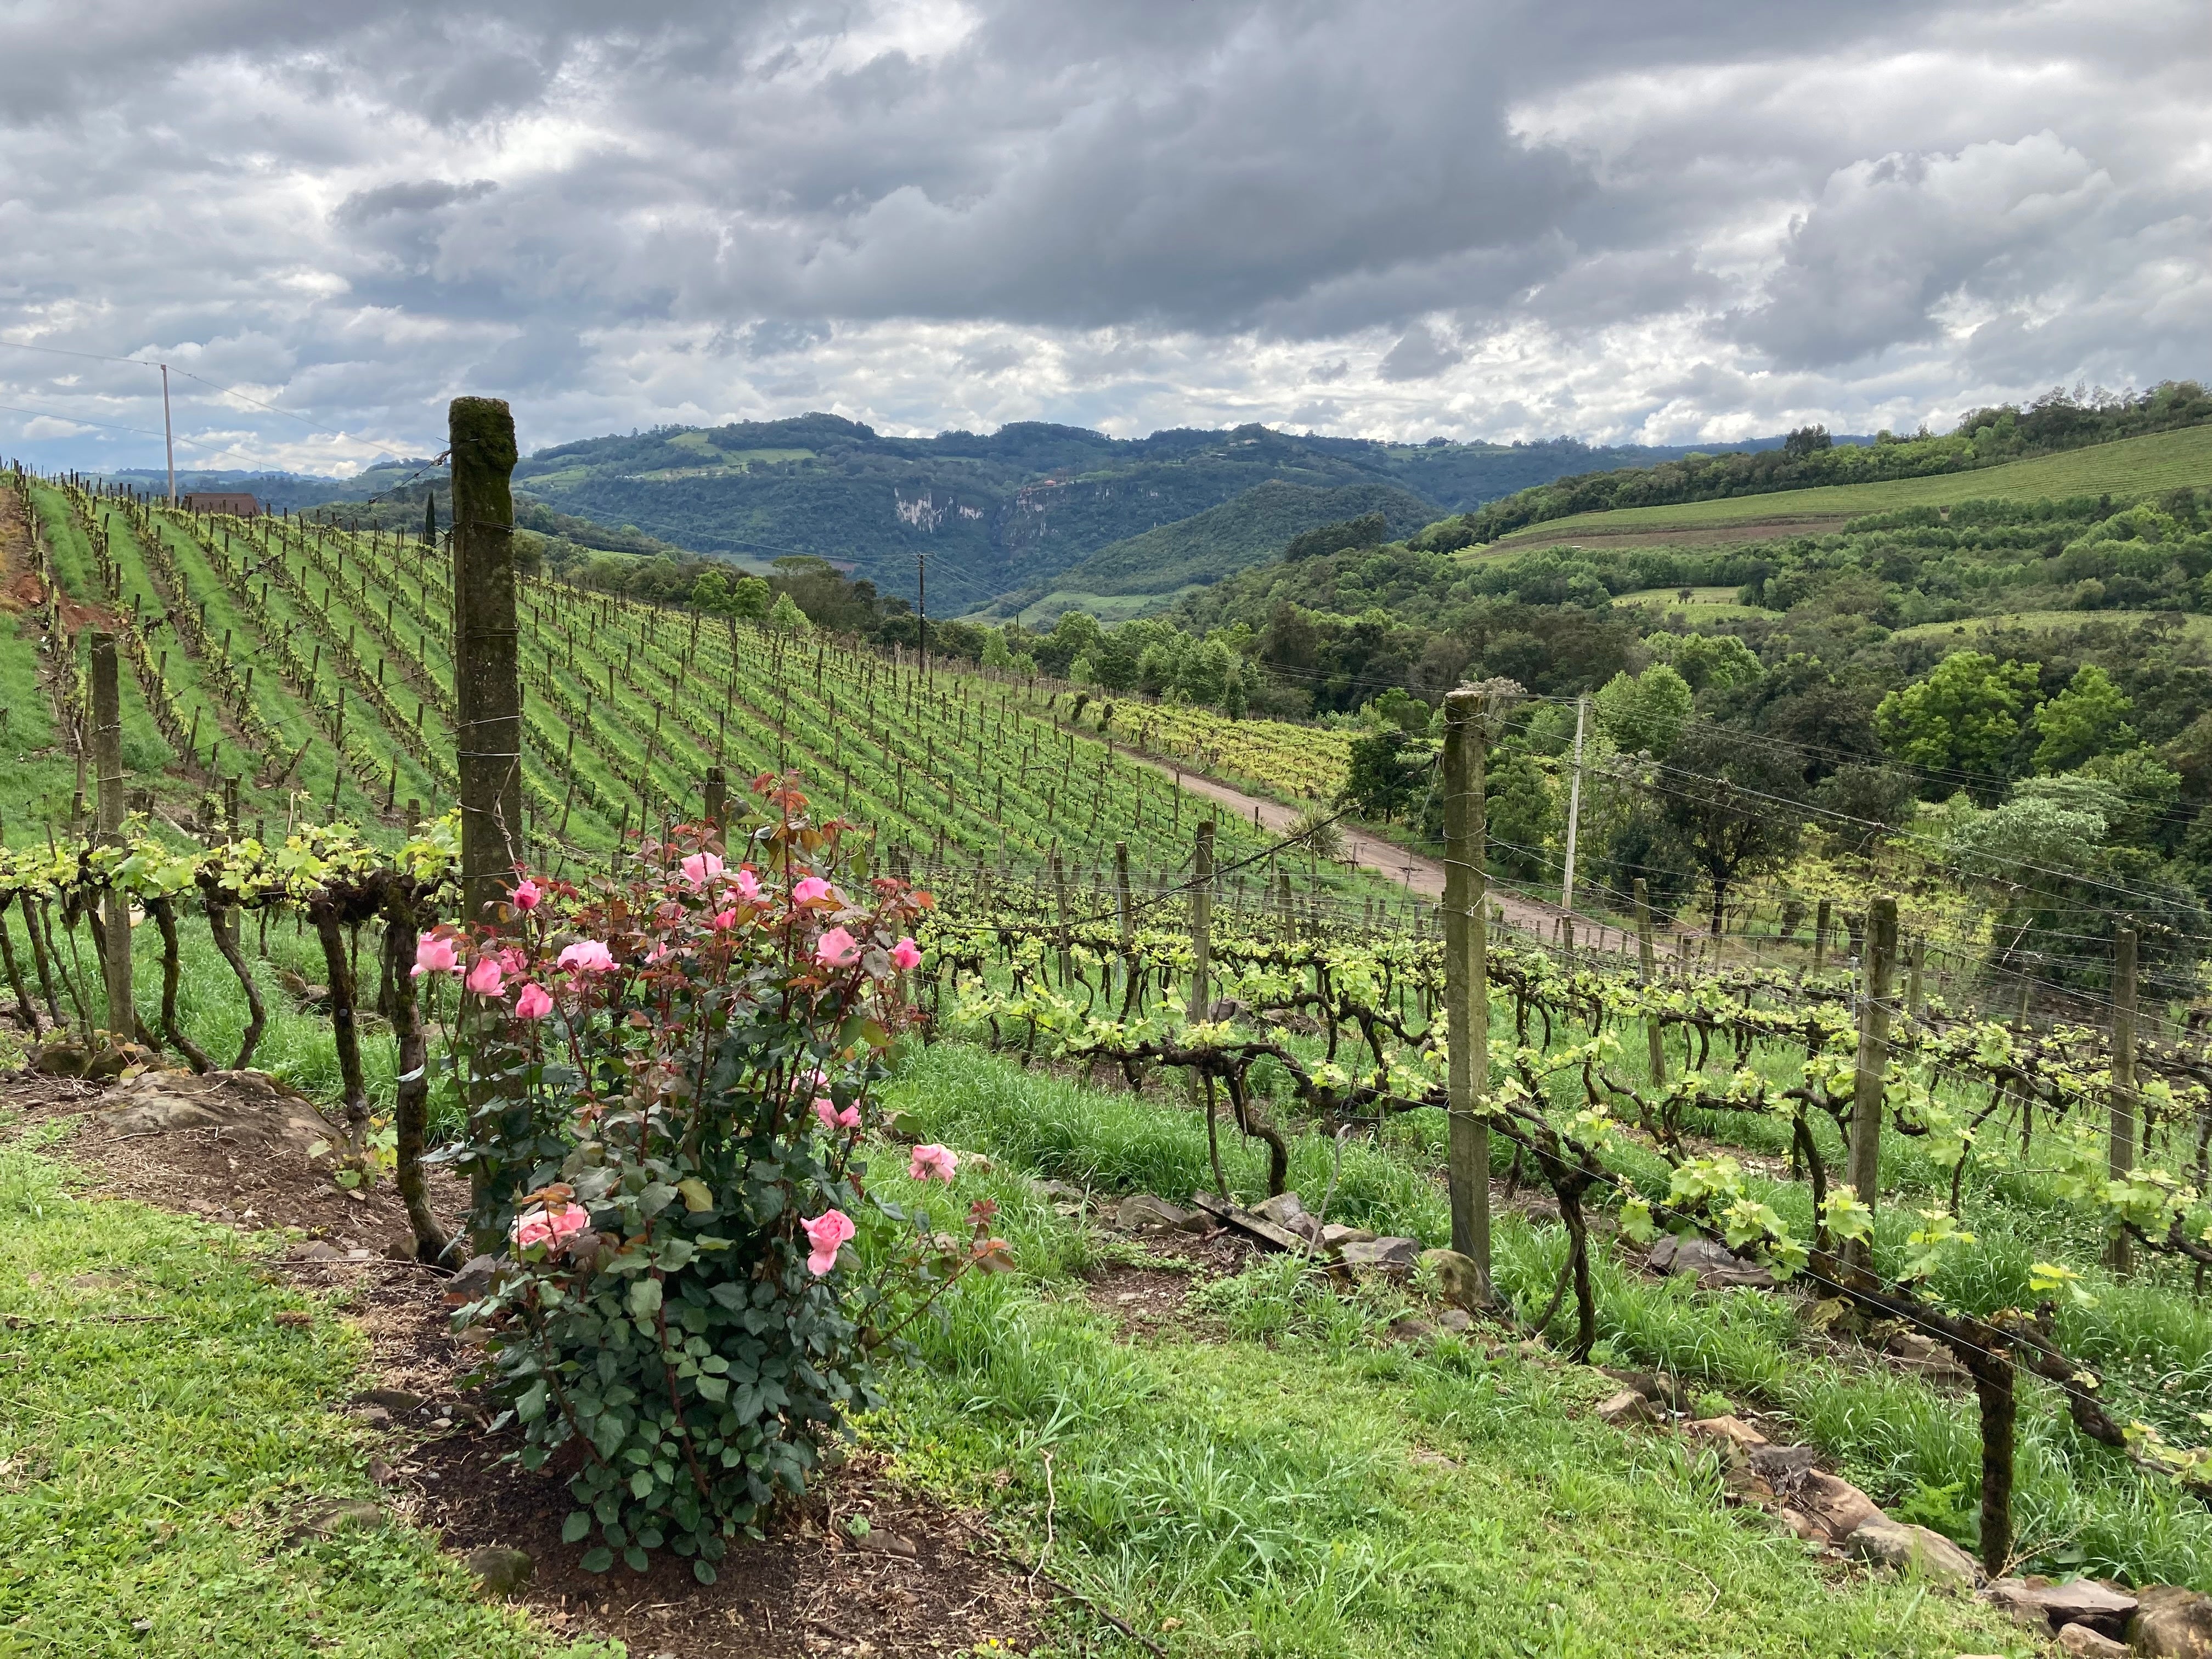 Brazilian Wine - a Q&A with Nic Corfe, founder of Go Brazil wines